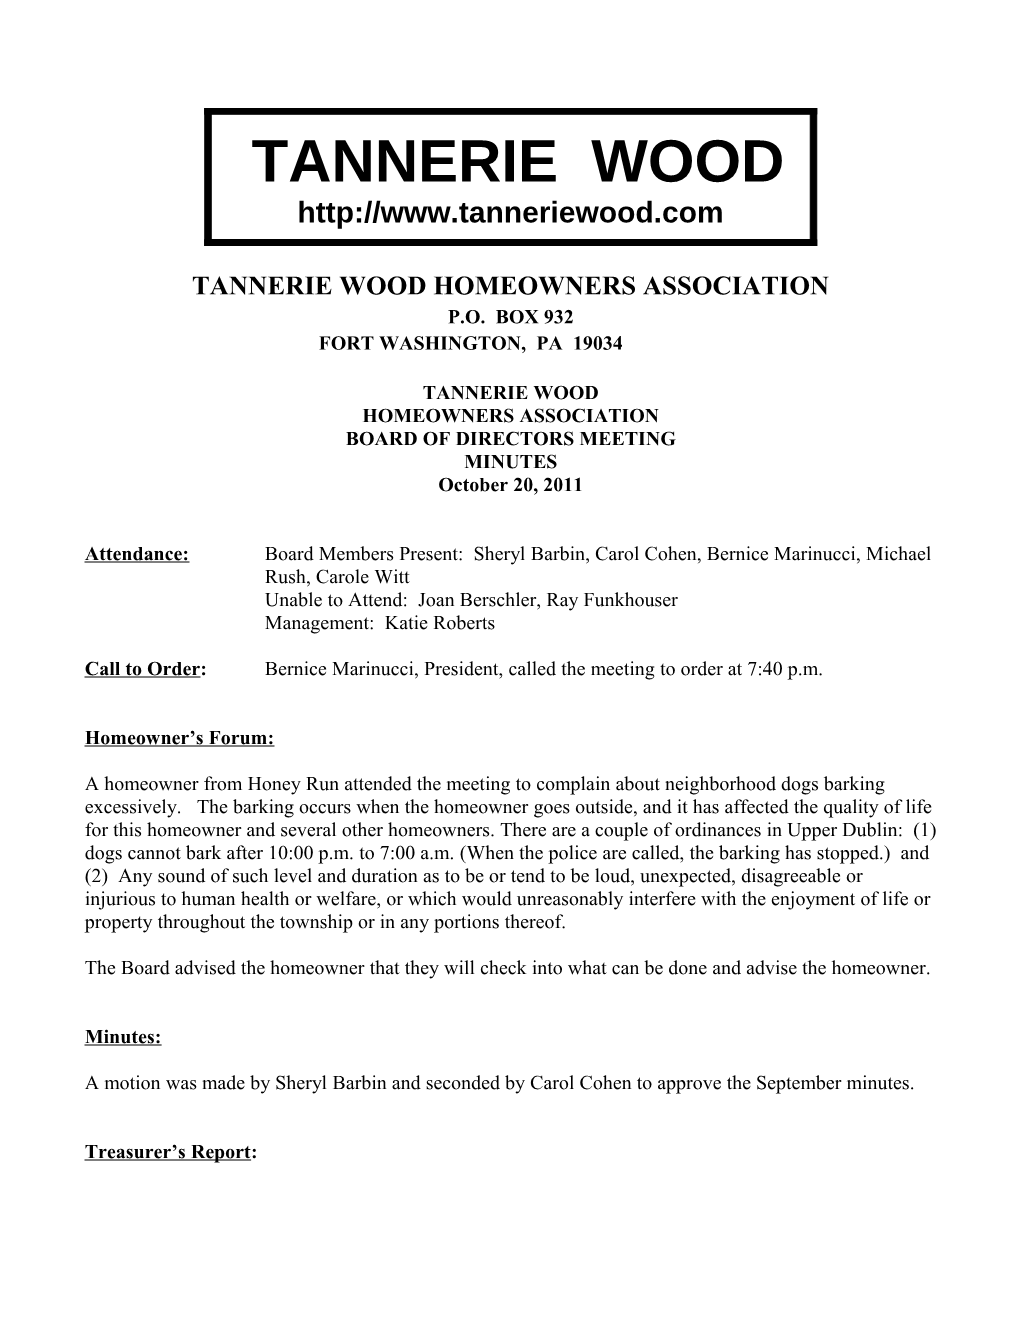 Tannerie Wood Homeowners Association